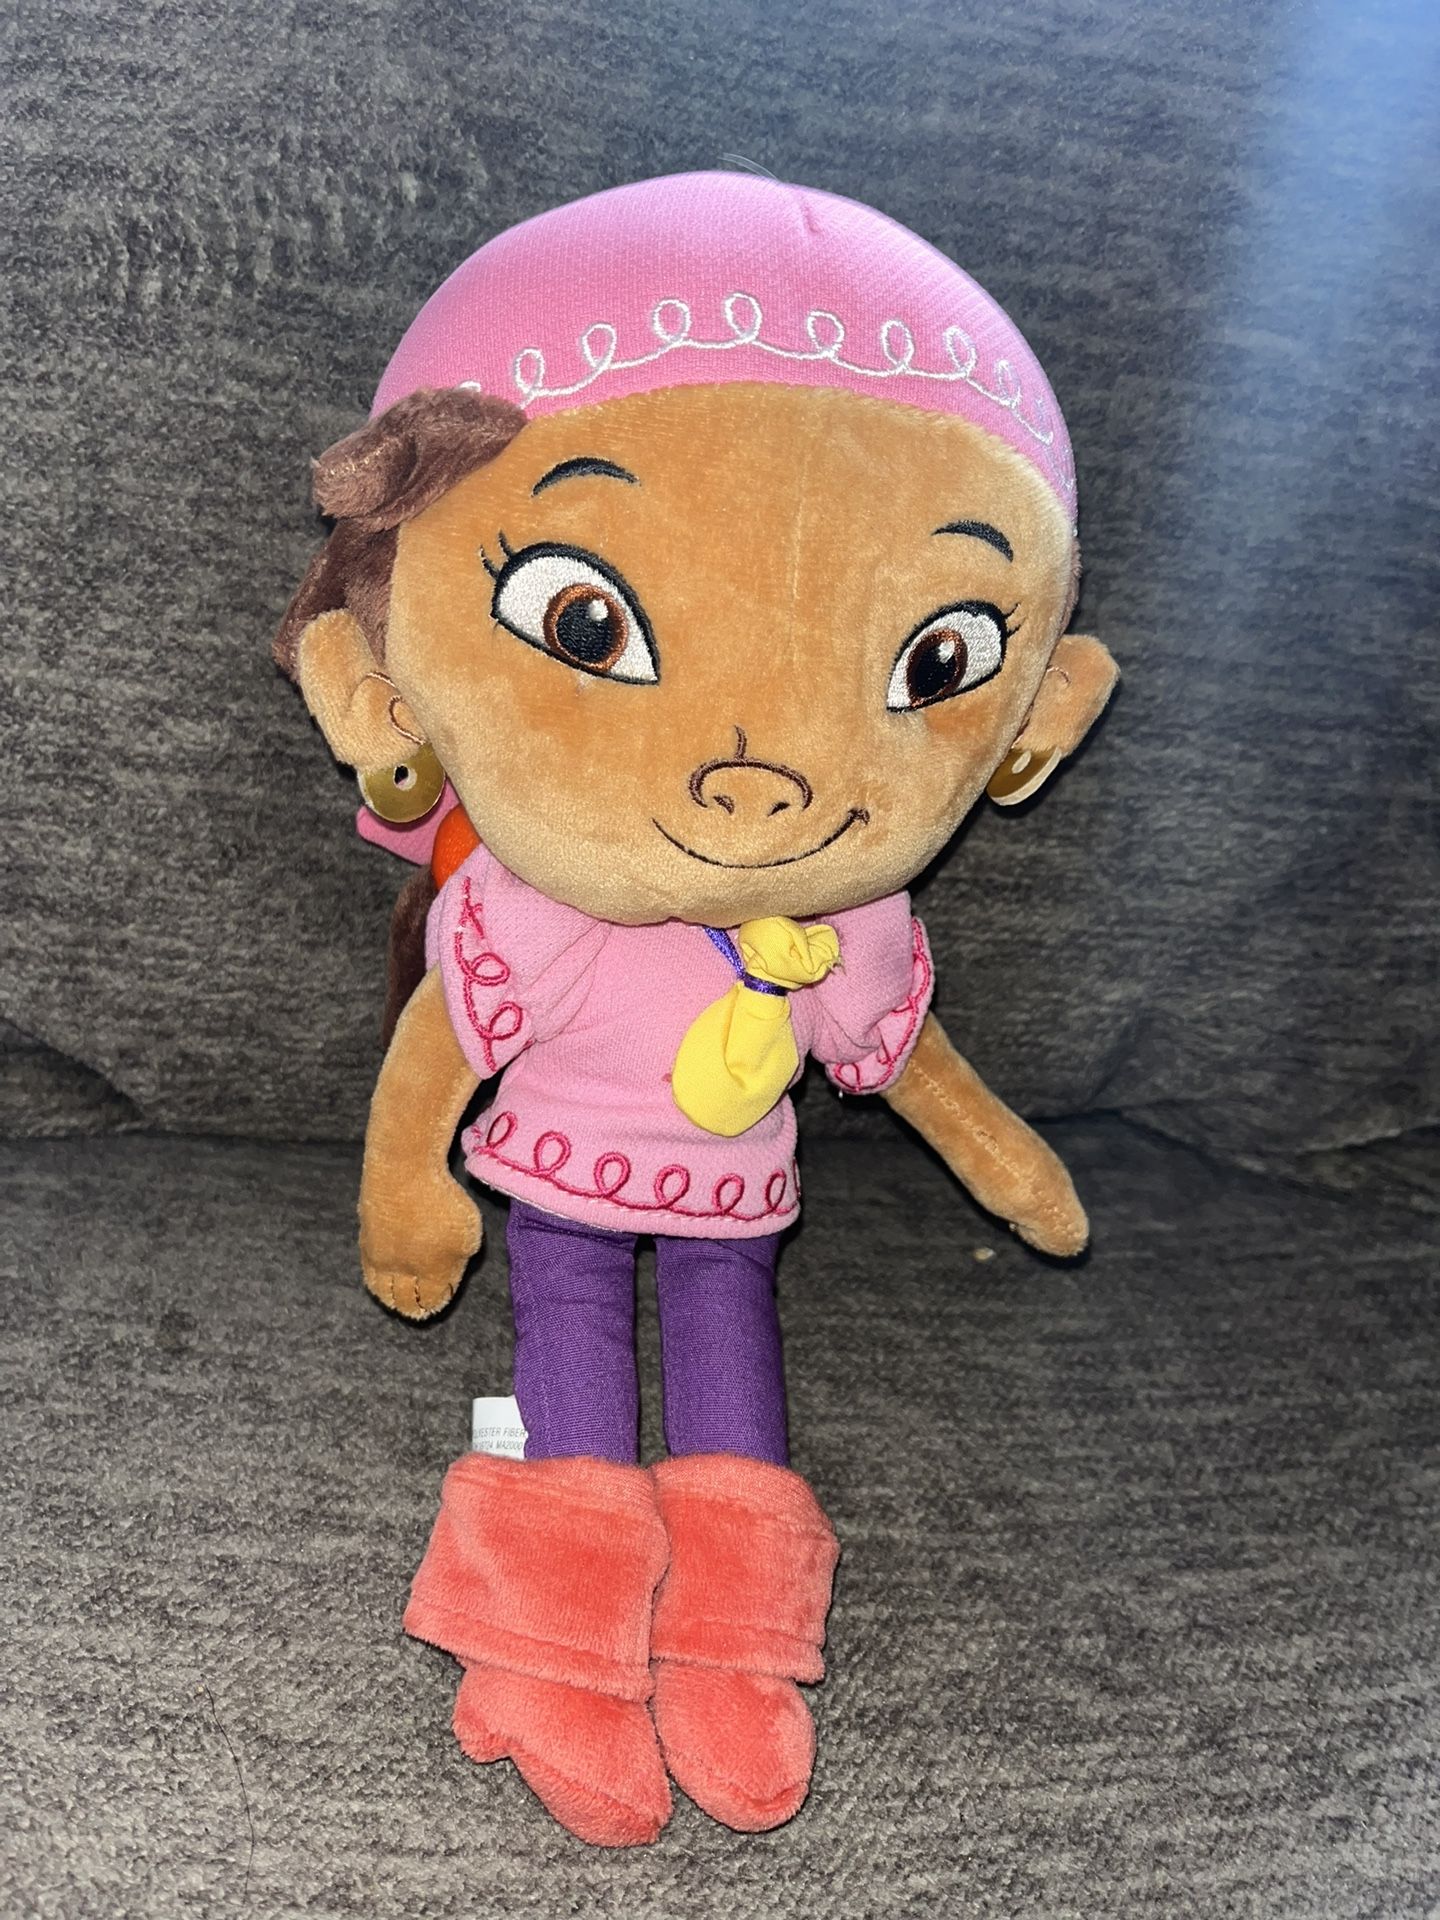 Jack and the never land pirates Izzy 12inch plush